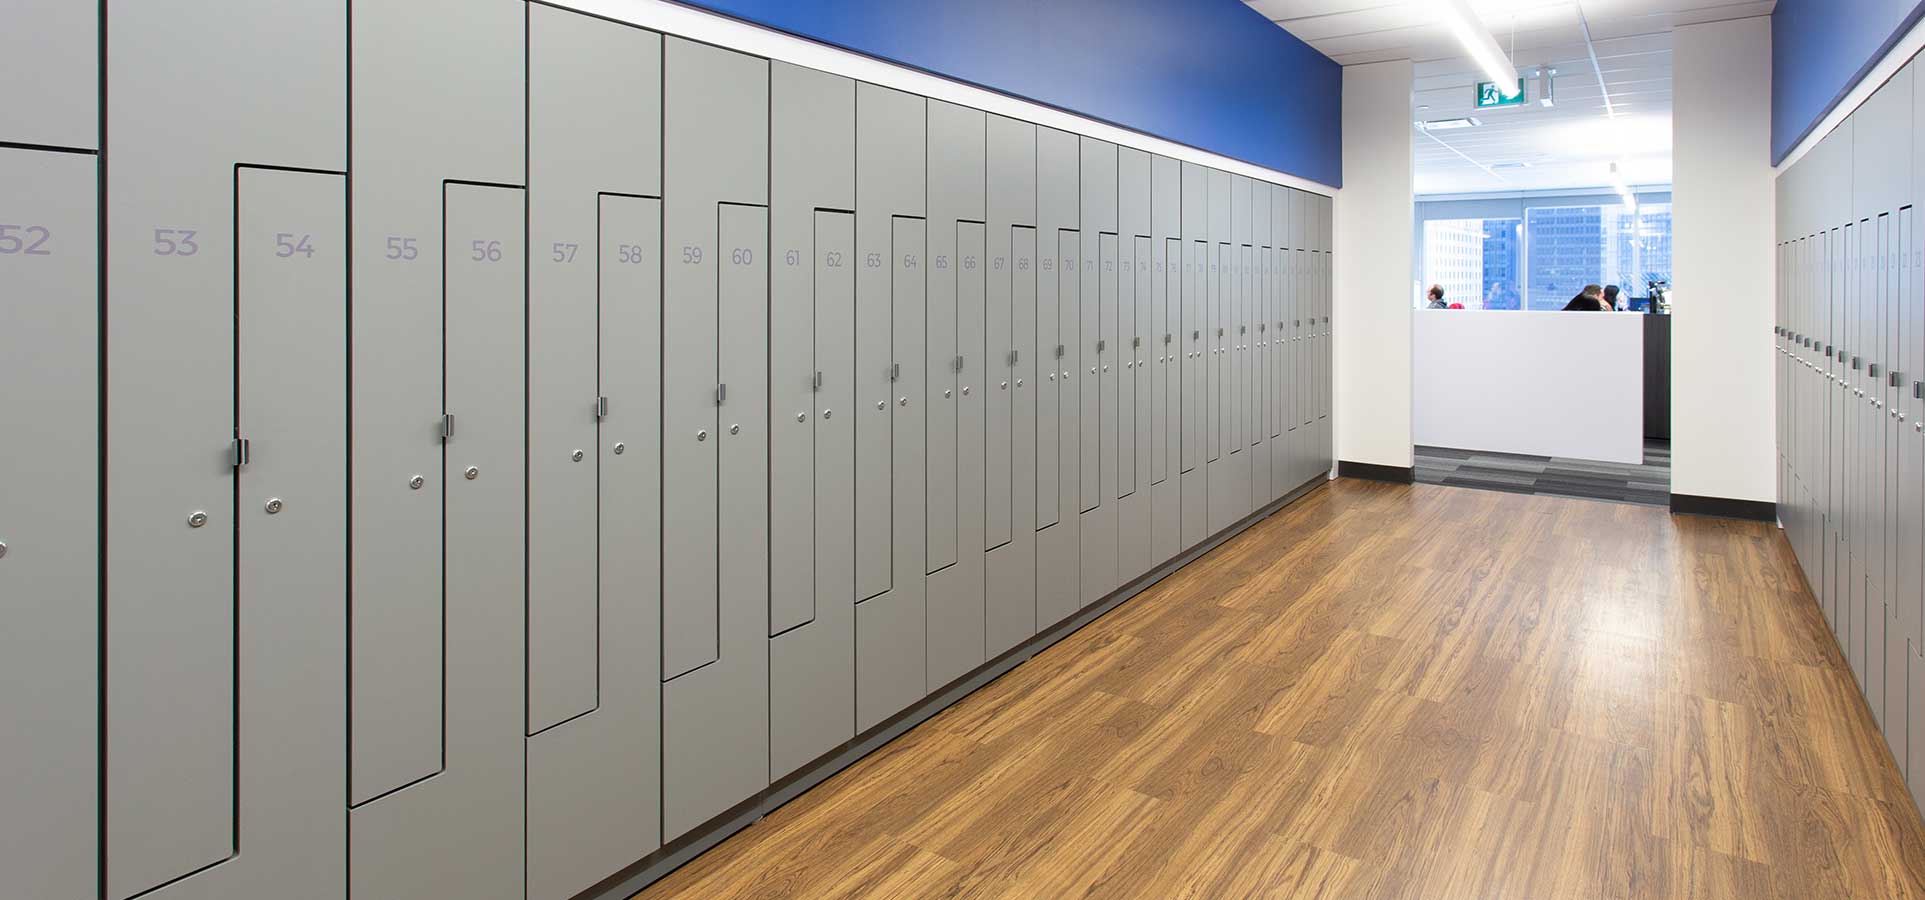 Wall of lockers in an office with wood floors